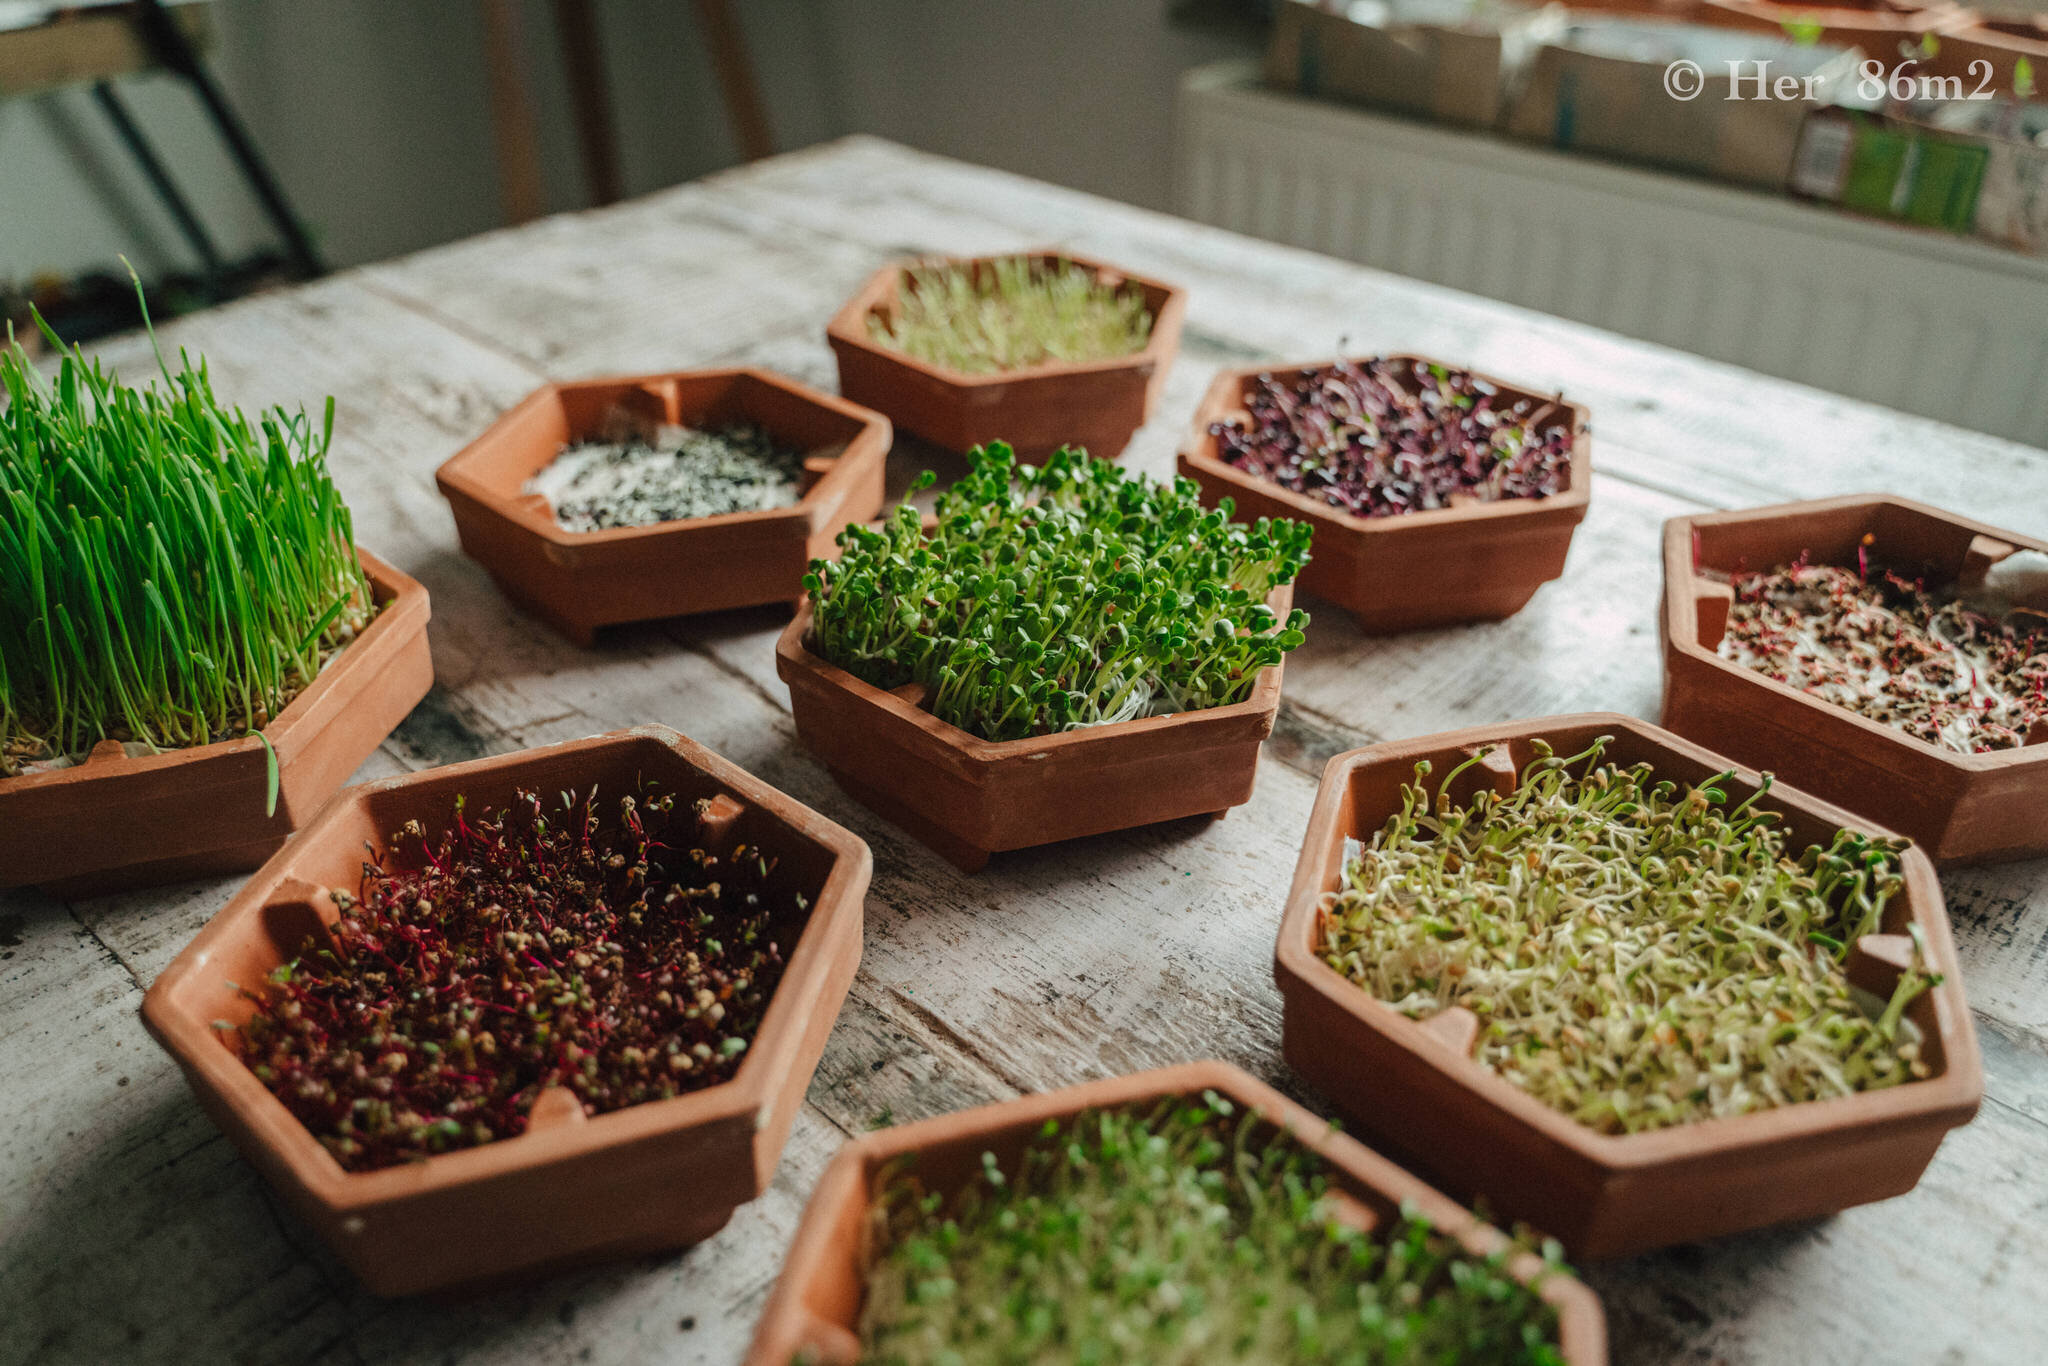 Grow Vegetables Indoors - Microgreens & Sprouts - From Seed to Harvest 16.JPG